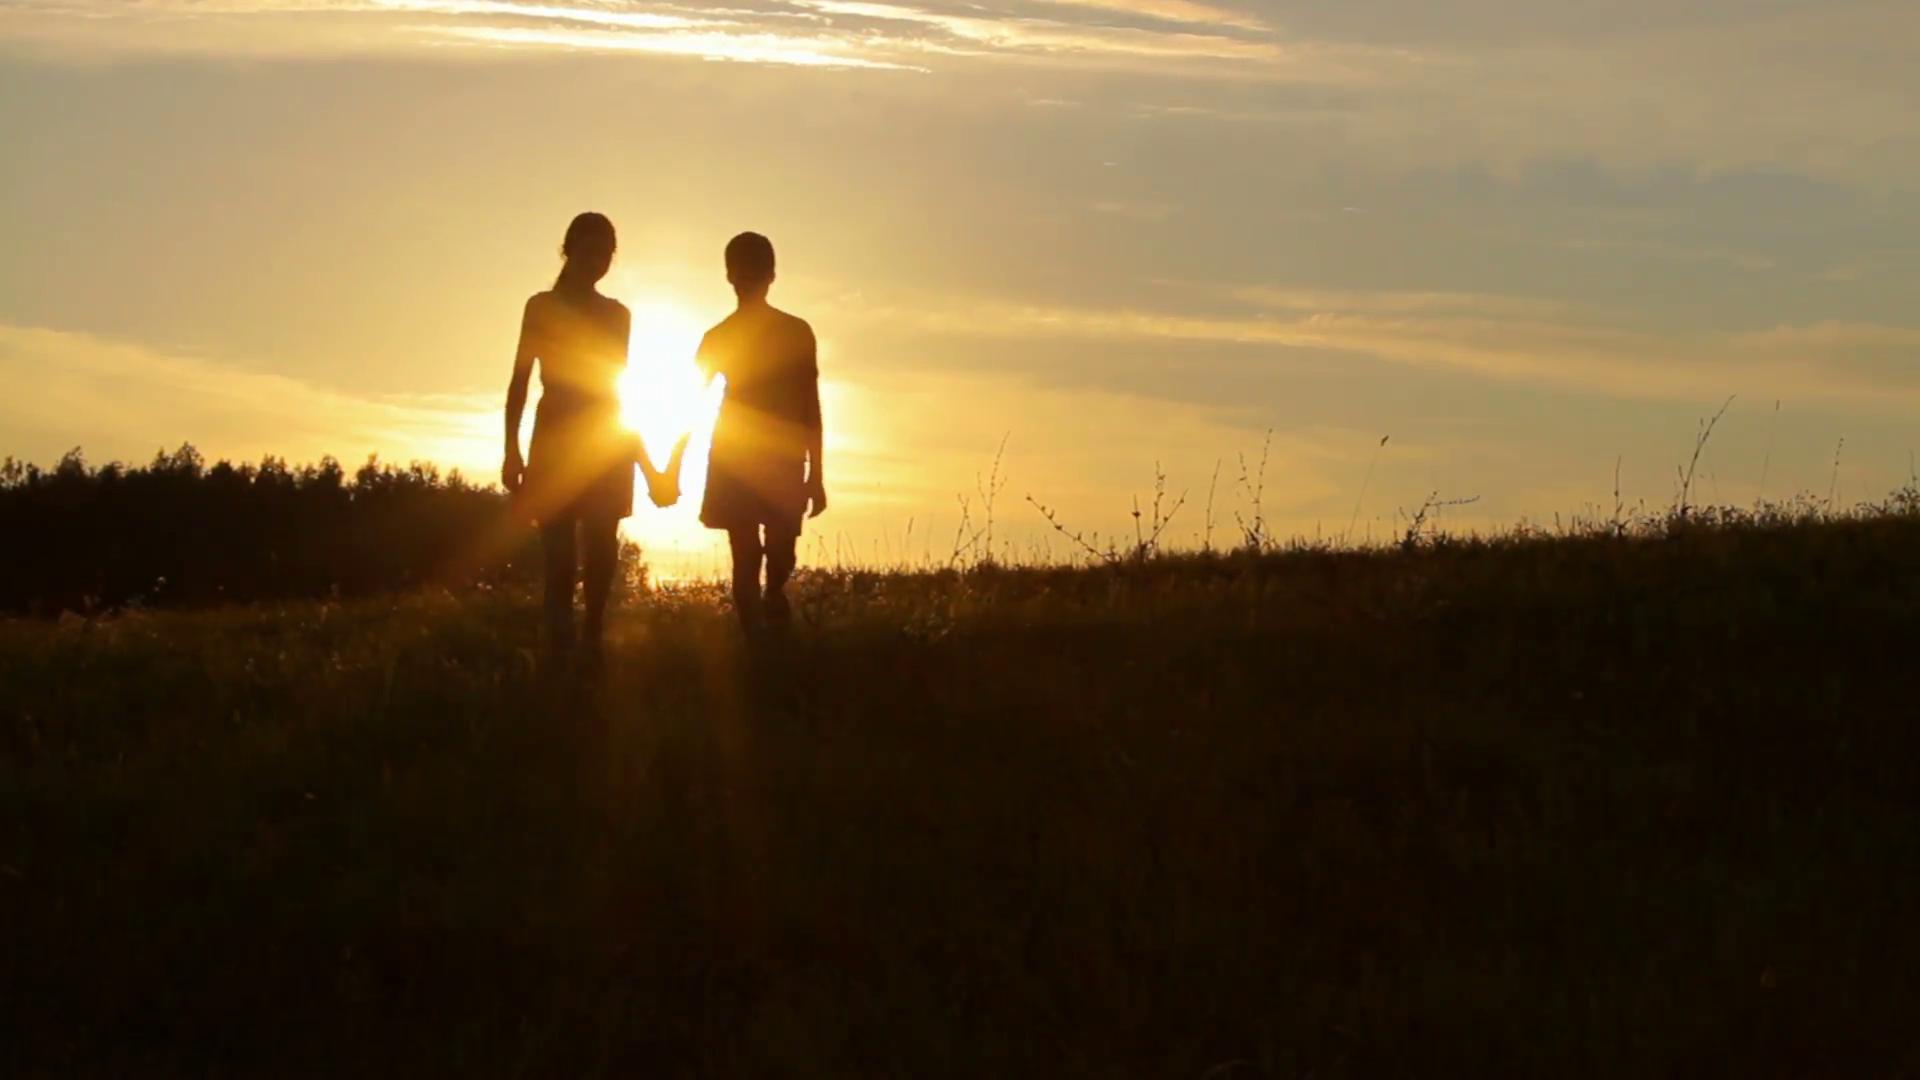 Two good friends together, sunset, peace and love, silhouettes in ...